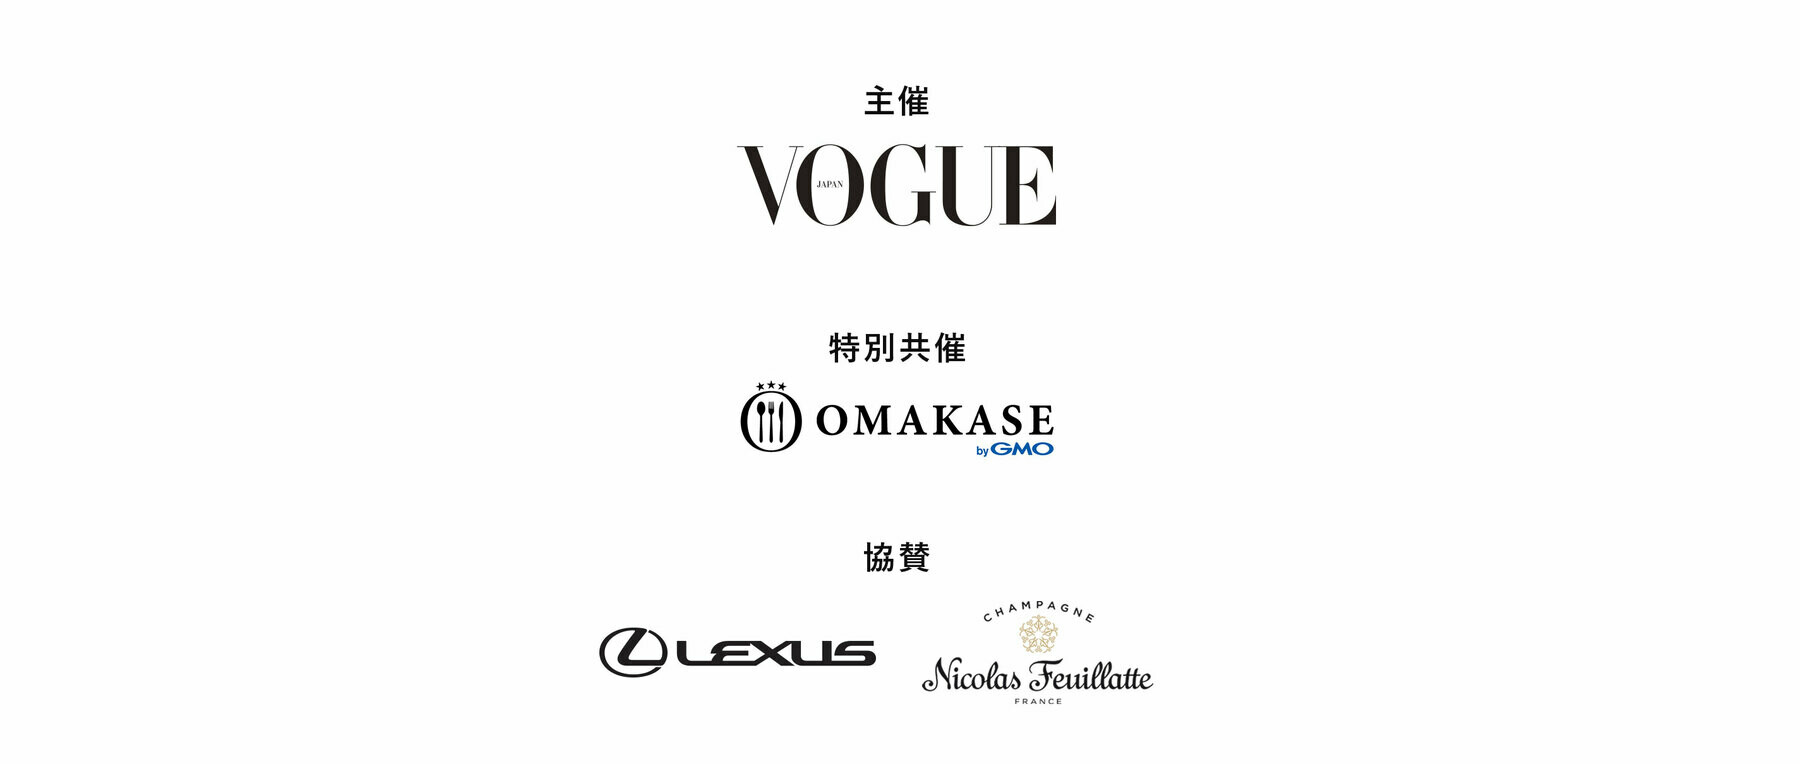 【Finished】VOGUE In Bloom's images4